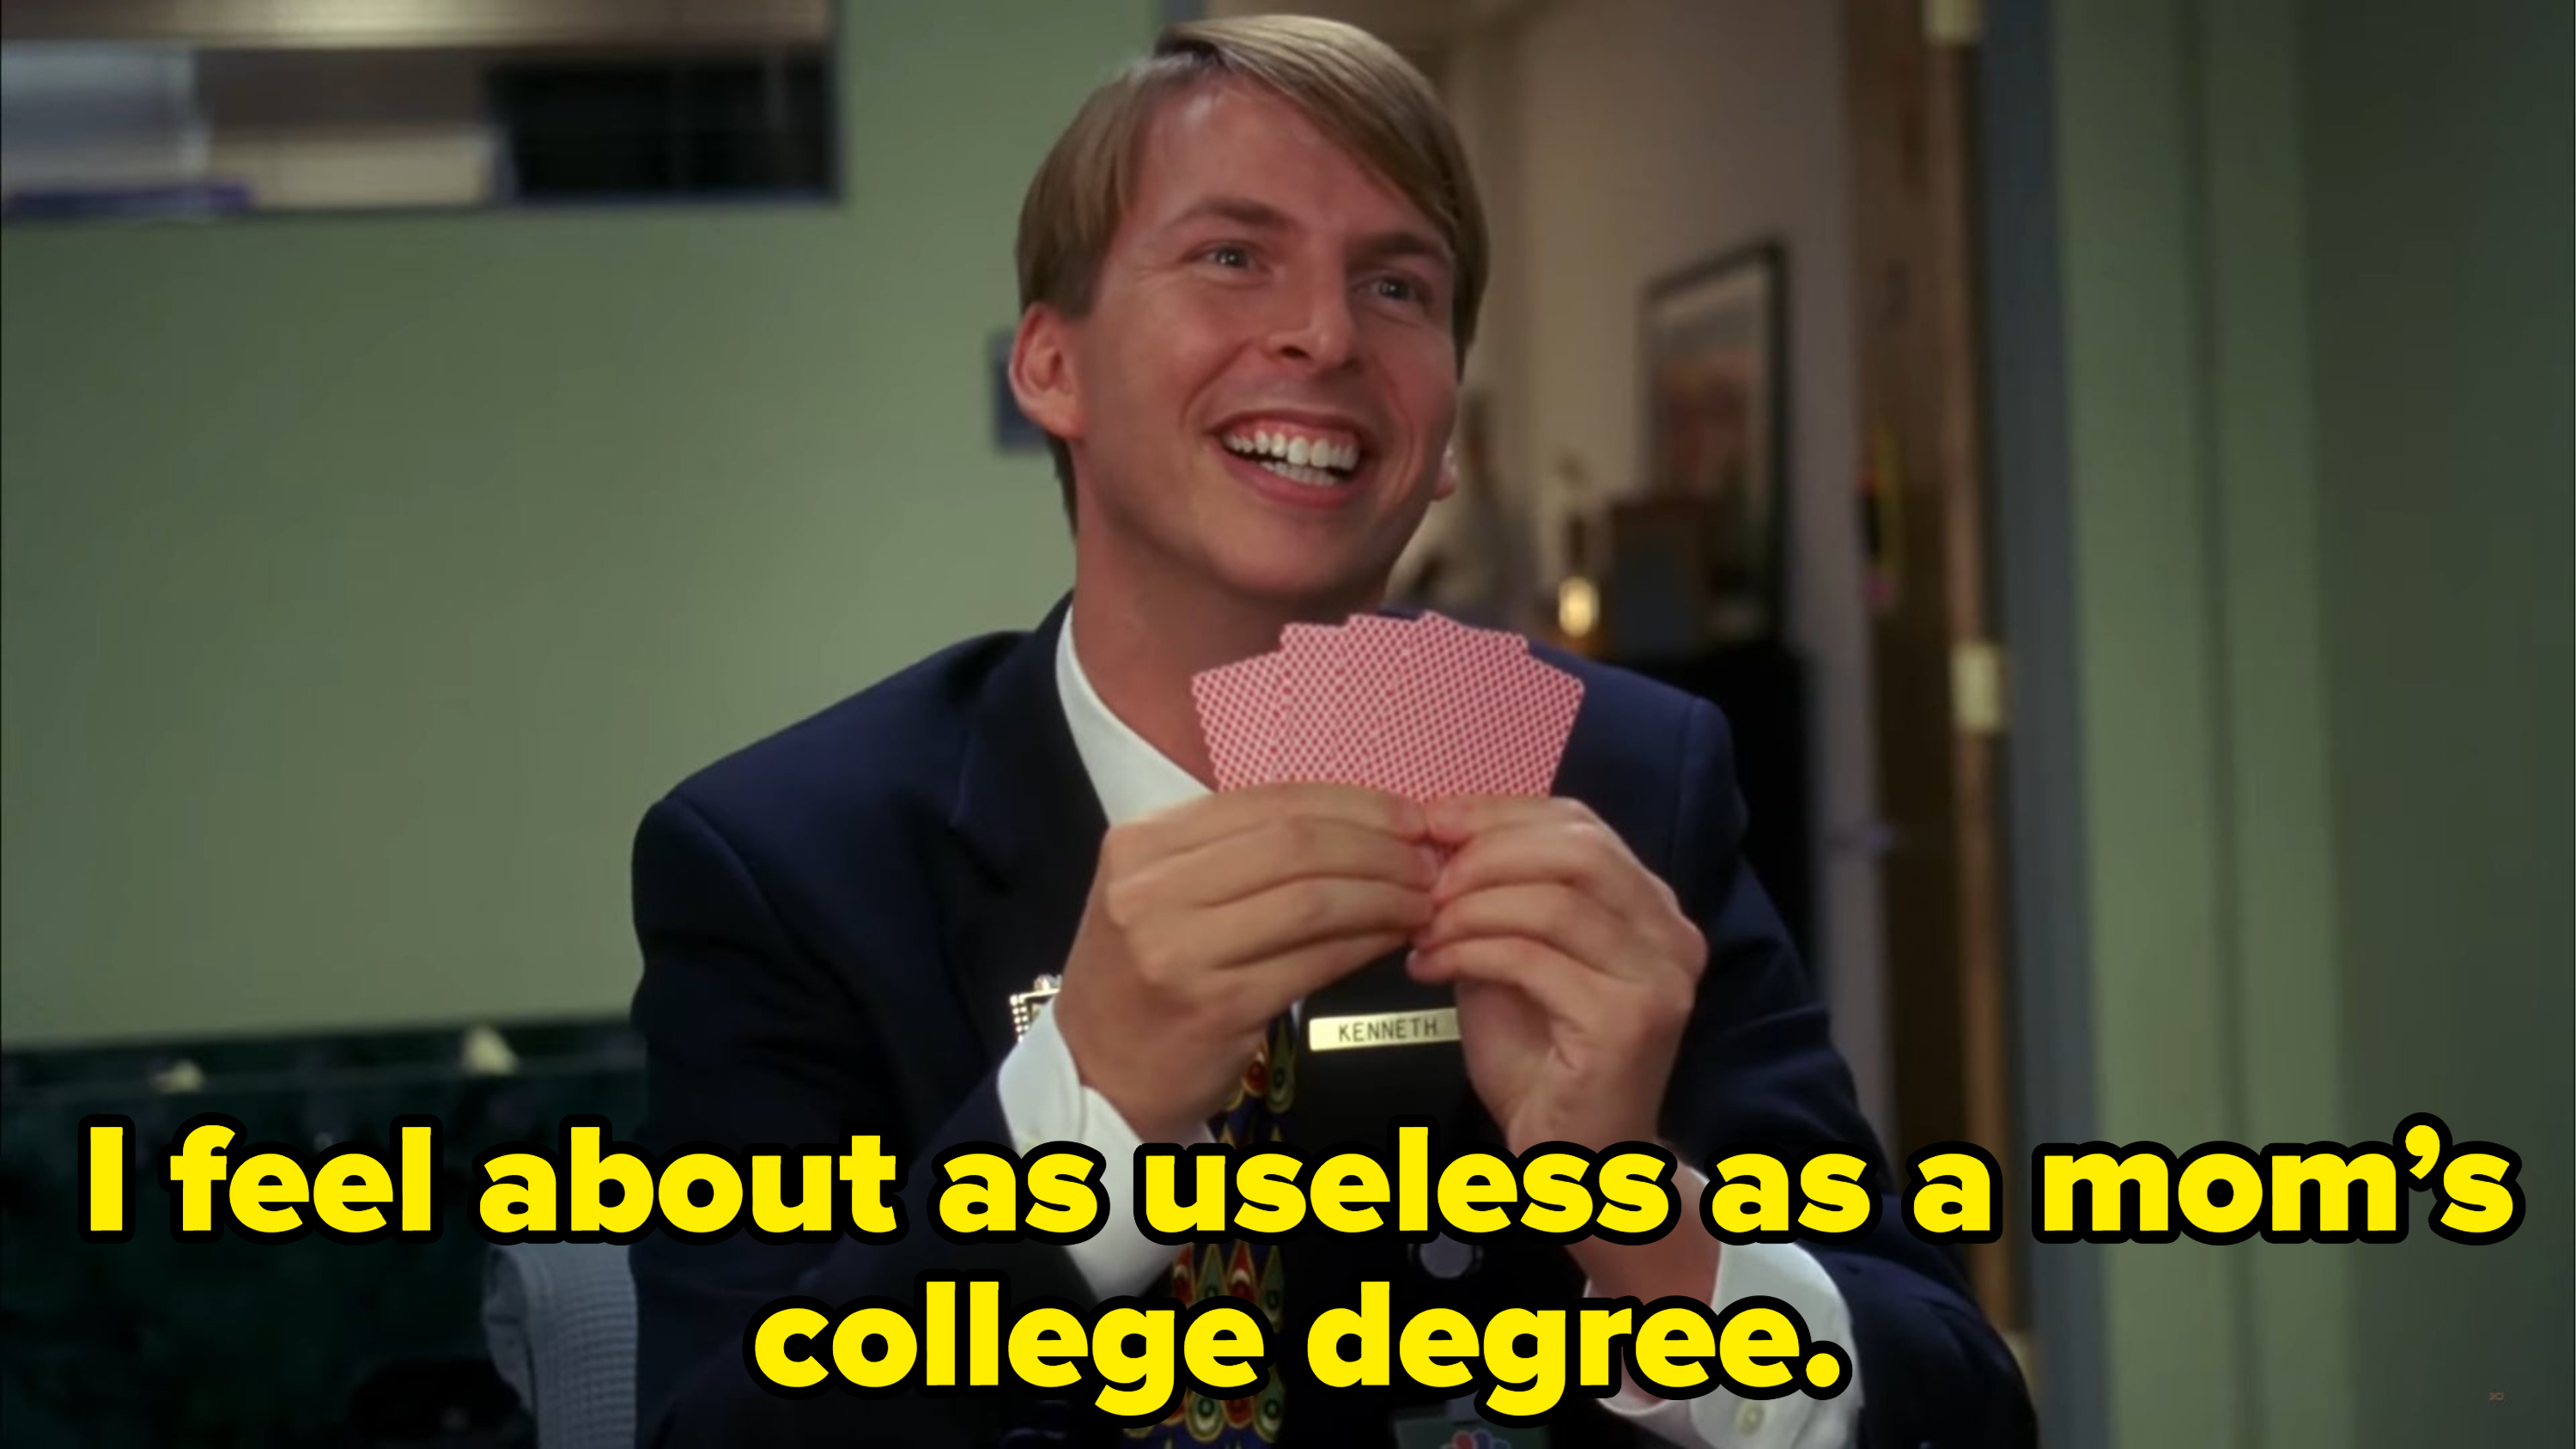 Jack McBrayer talks to someone while holding poker cards